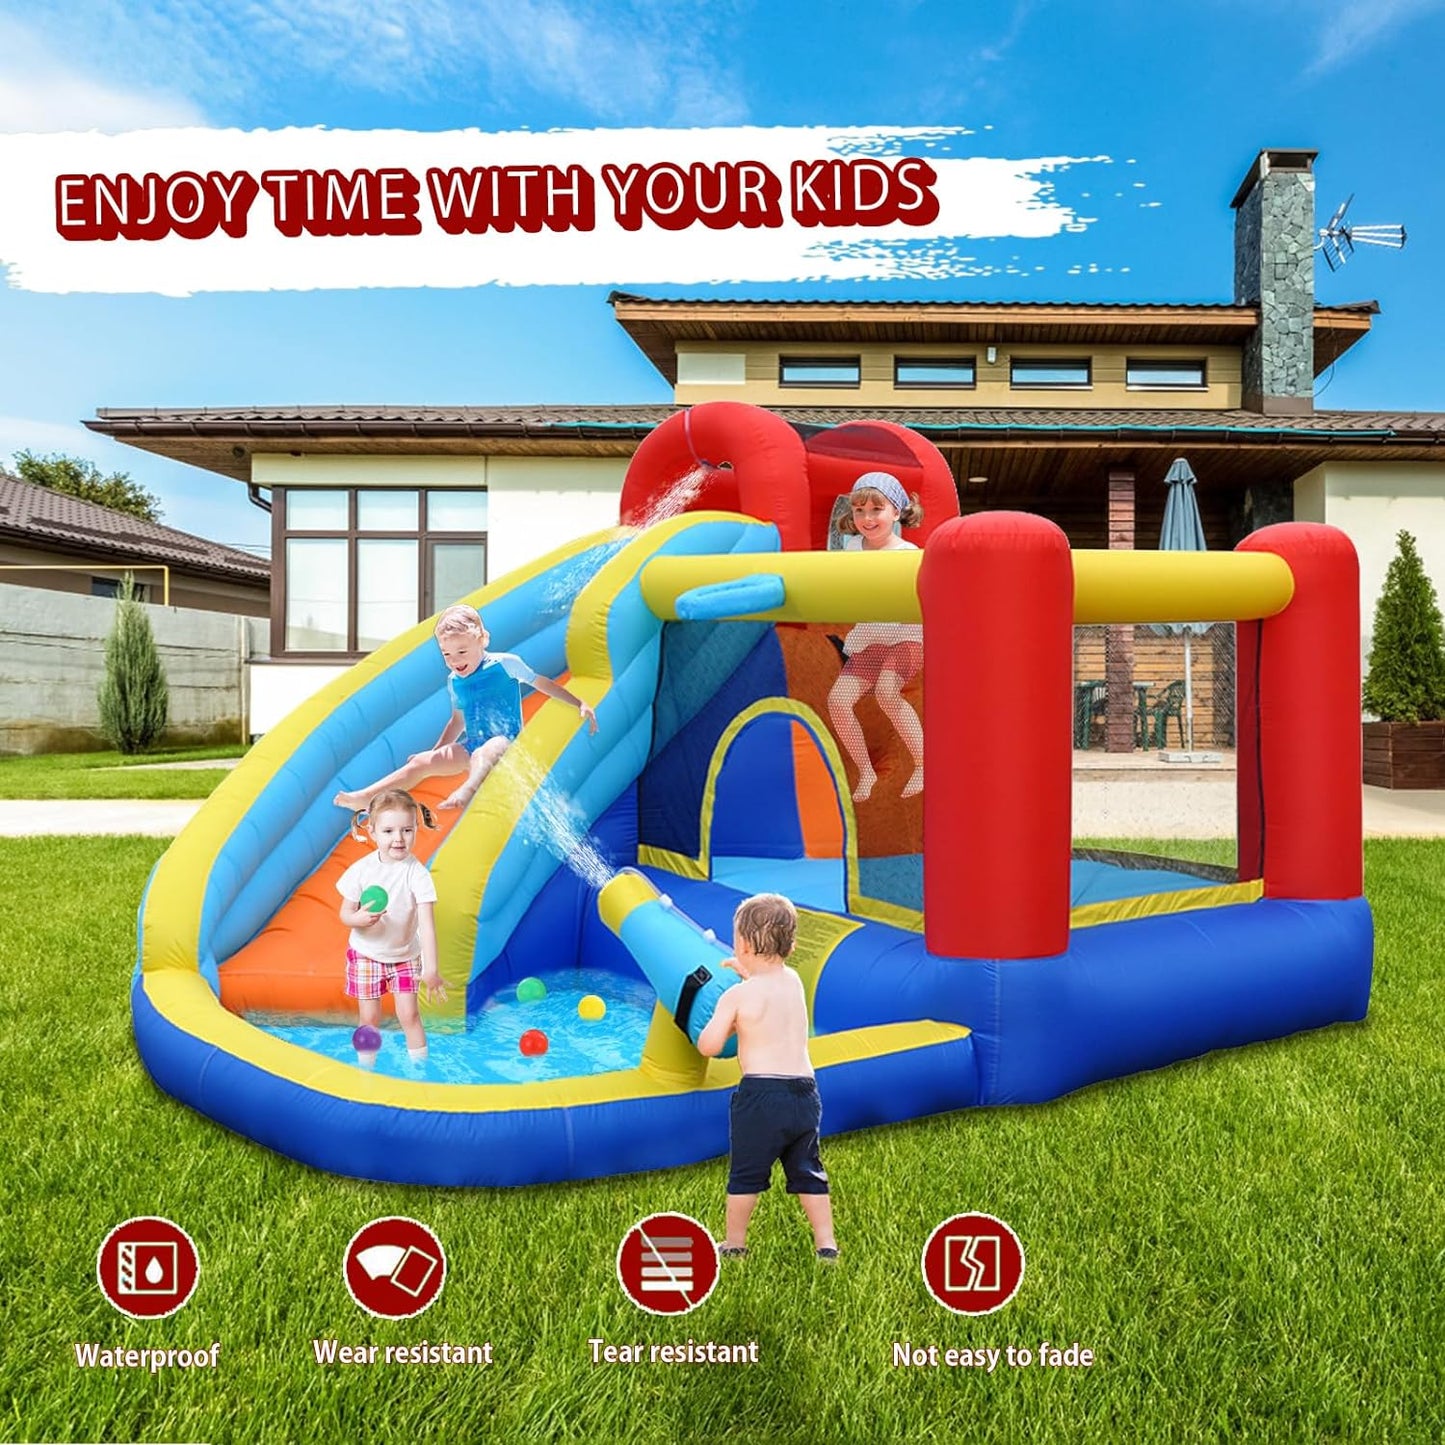 bouncy castle with pump extra large bouncy castle with slide 545 x 365 x 218 cm children's inflatable bouncy castle for adults/children,Pink